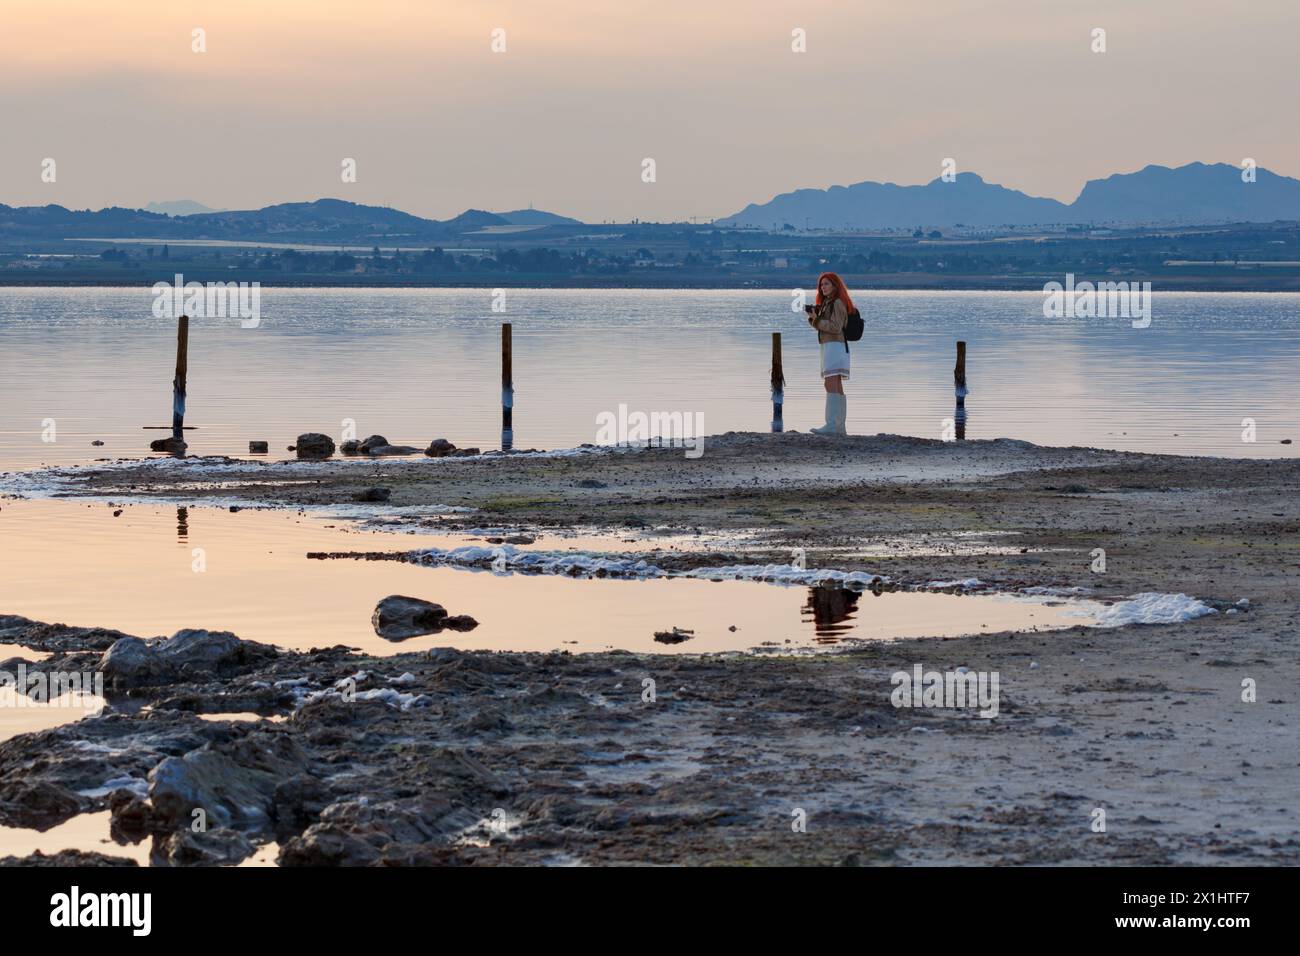 Woman photographing the sunset in the salt flats of Torrevieja, Spain Stock Photo